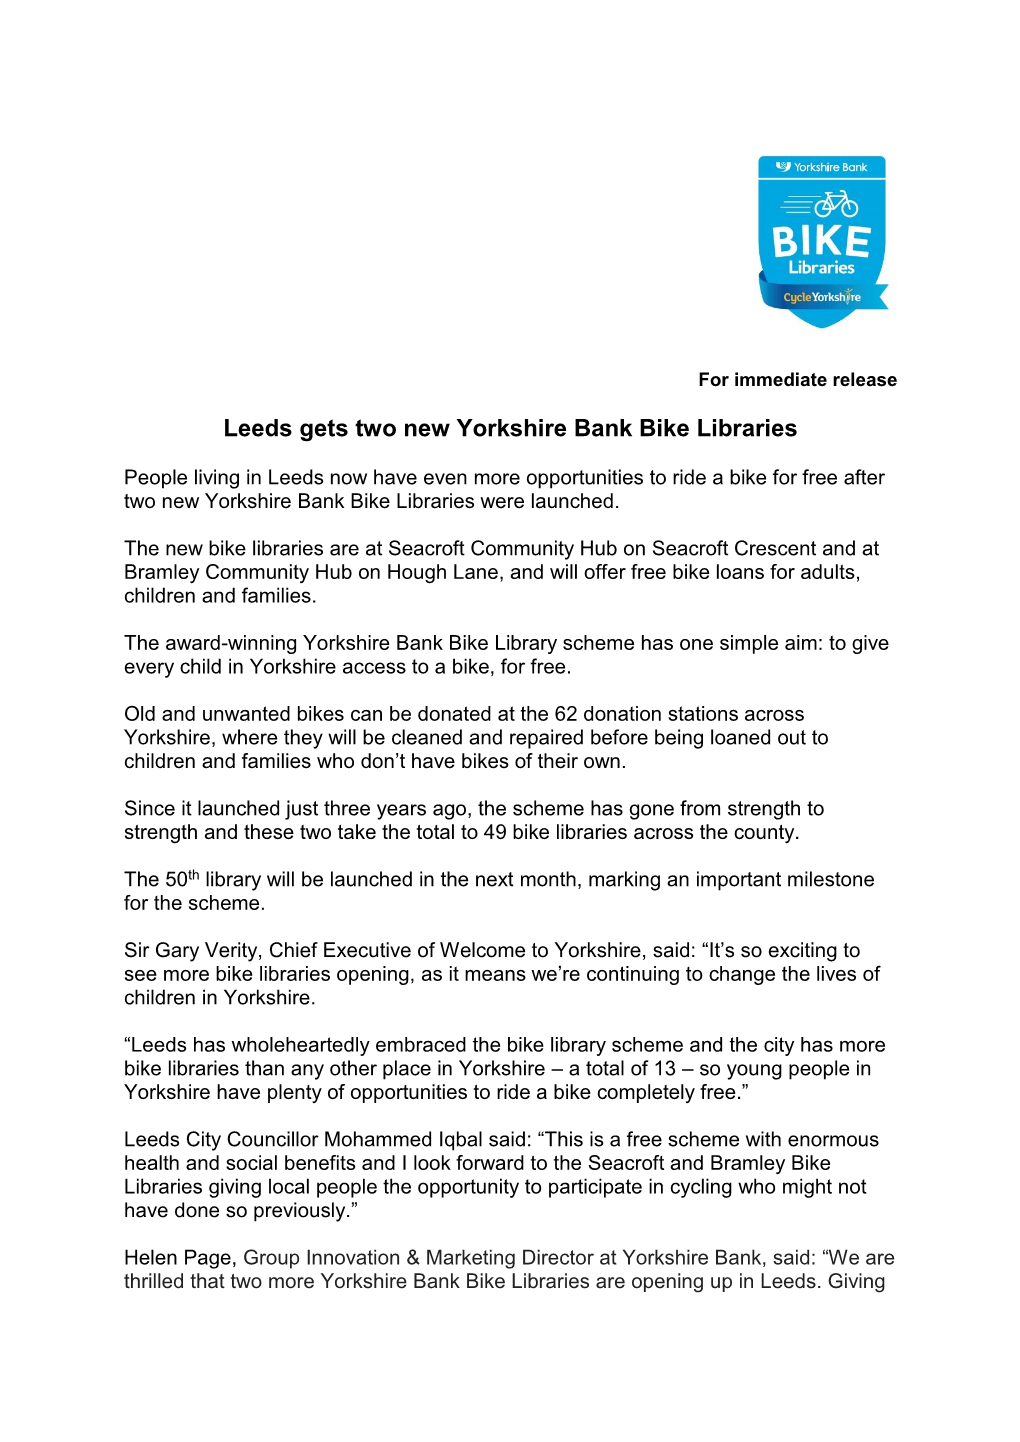 Leeds Gets Two New Yorkshire Bank Bike Libraries